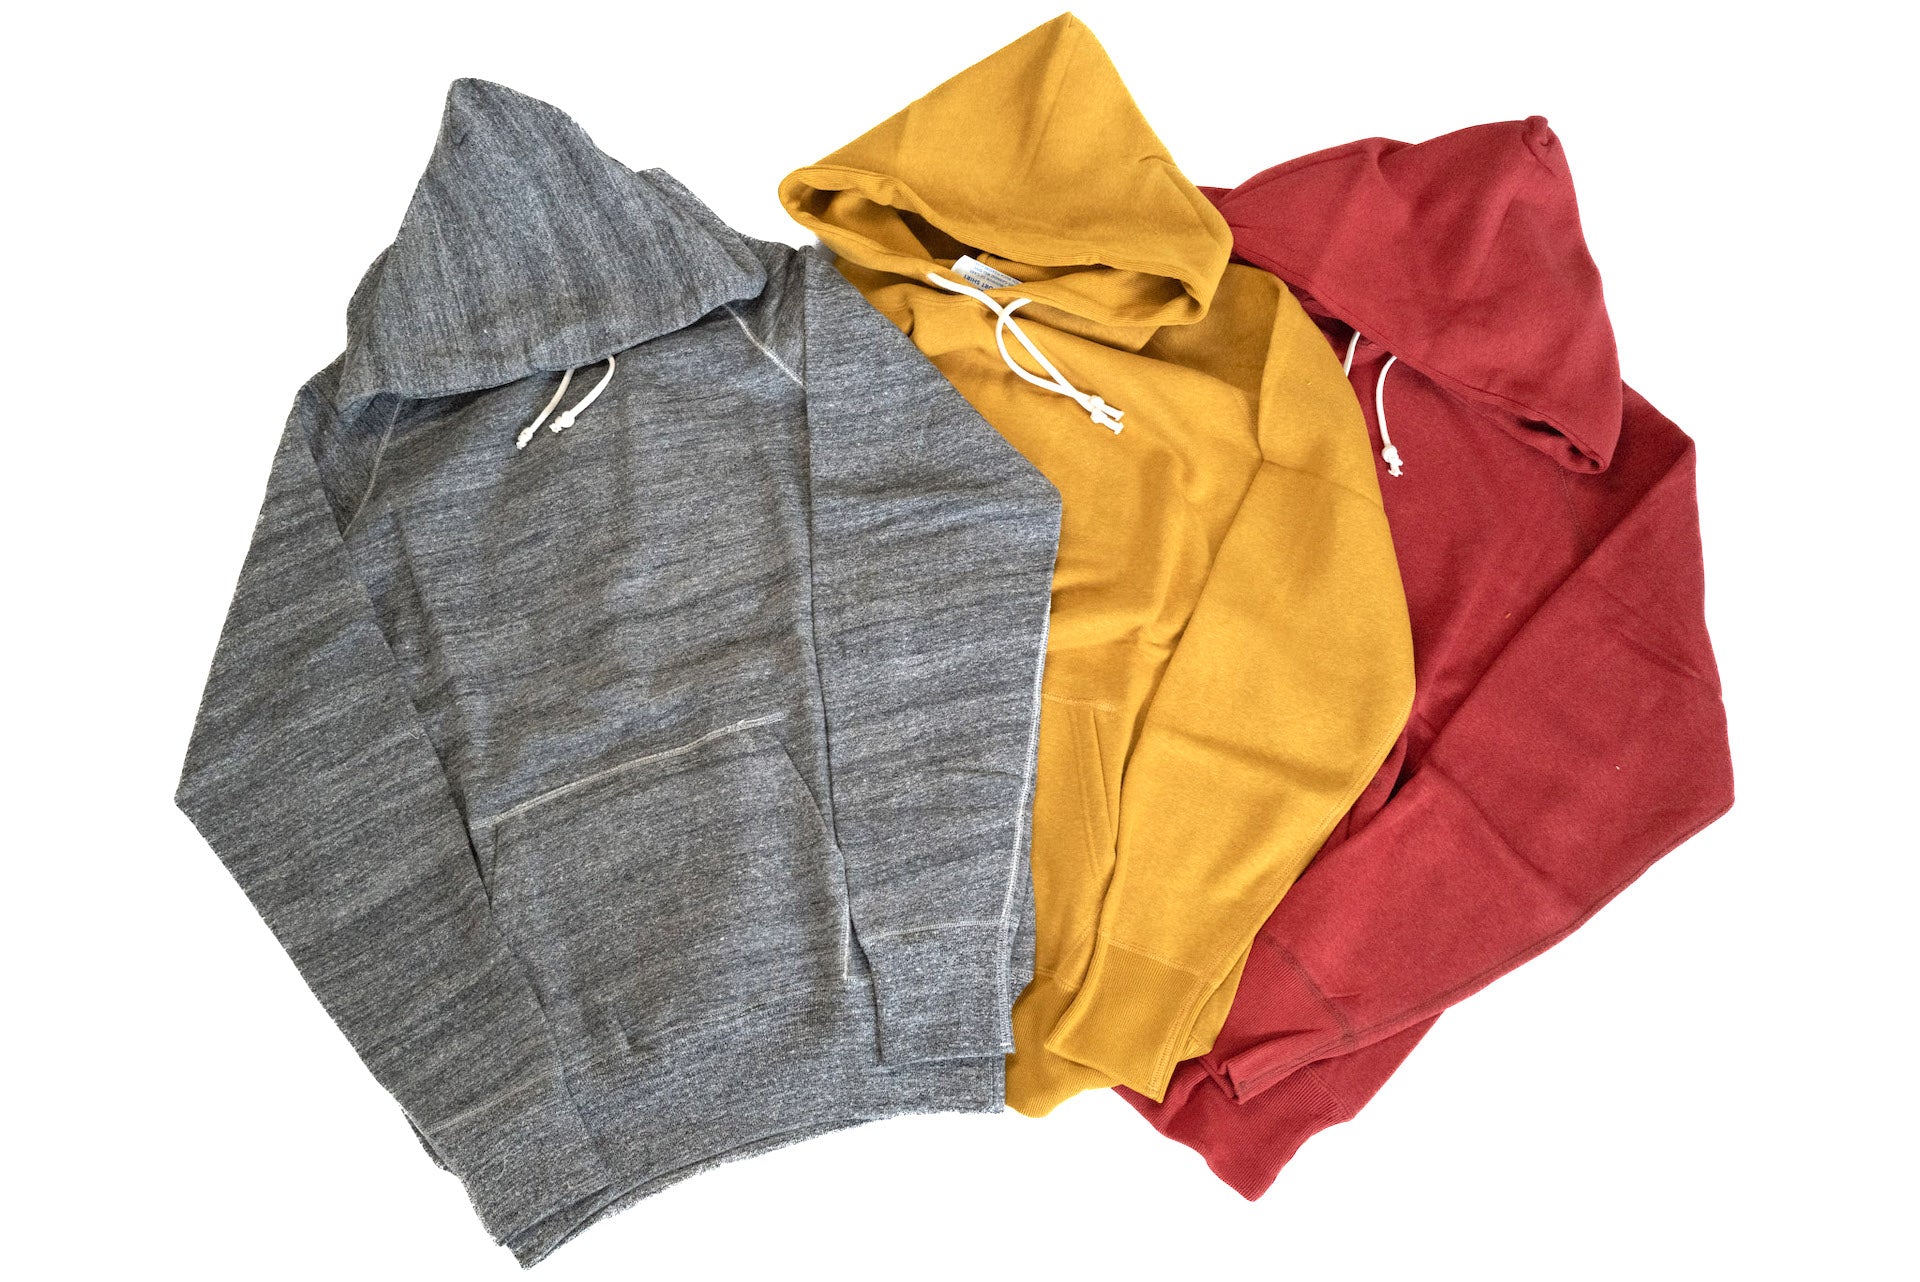 Denime X Warehouse Co Lot.262 10oz Loopwheeled Pull Over (Red)